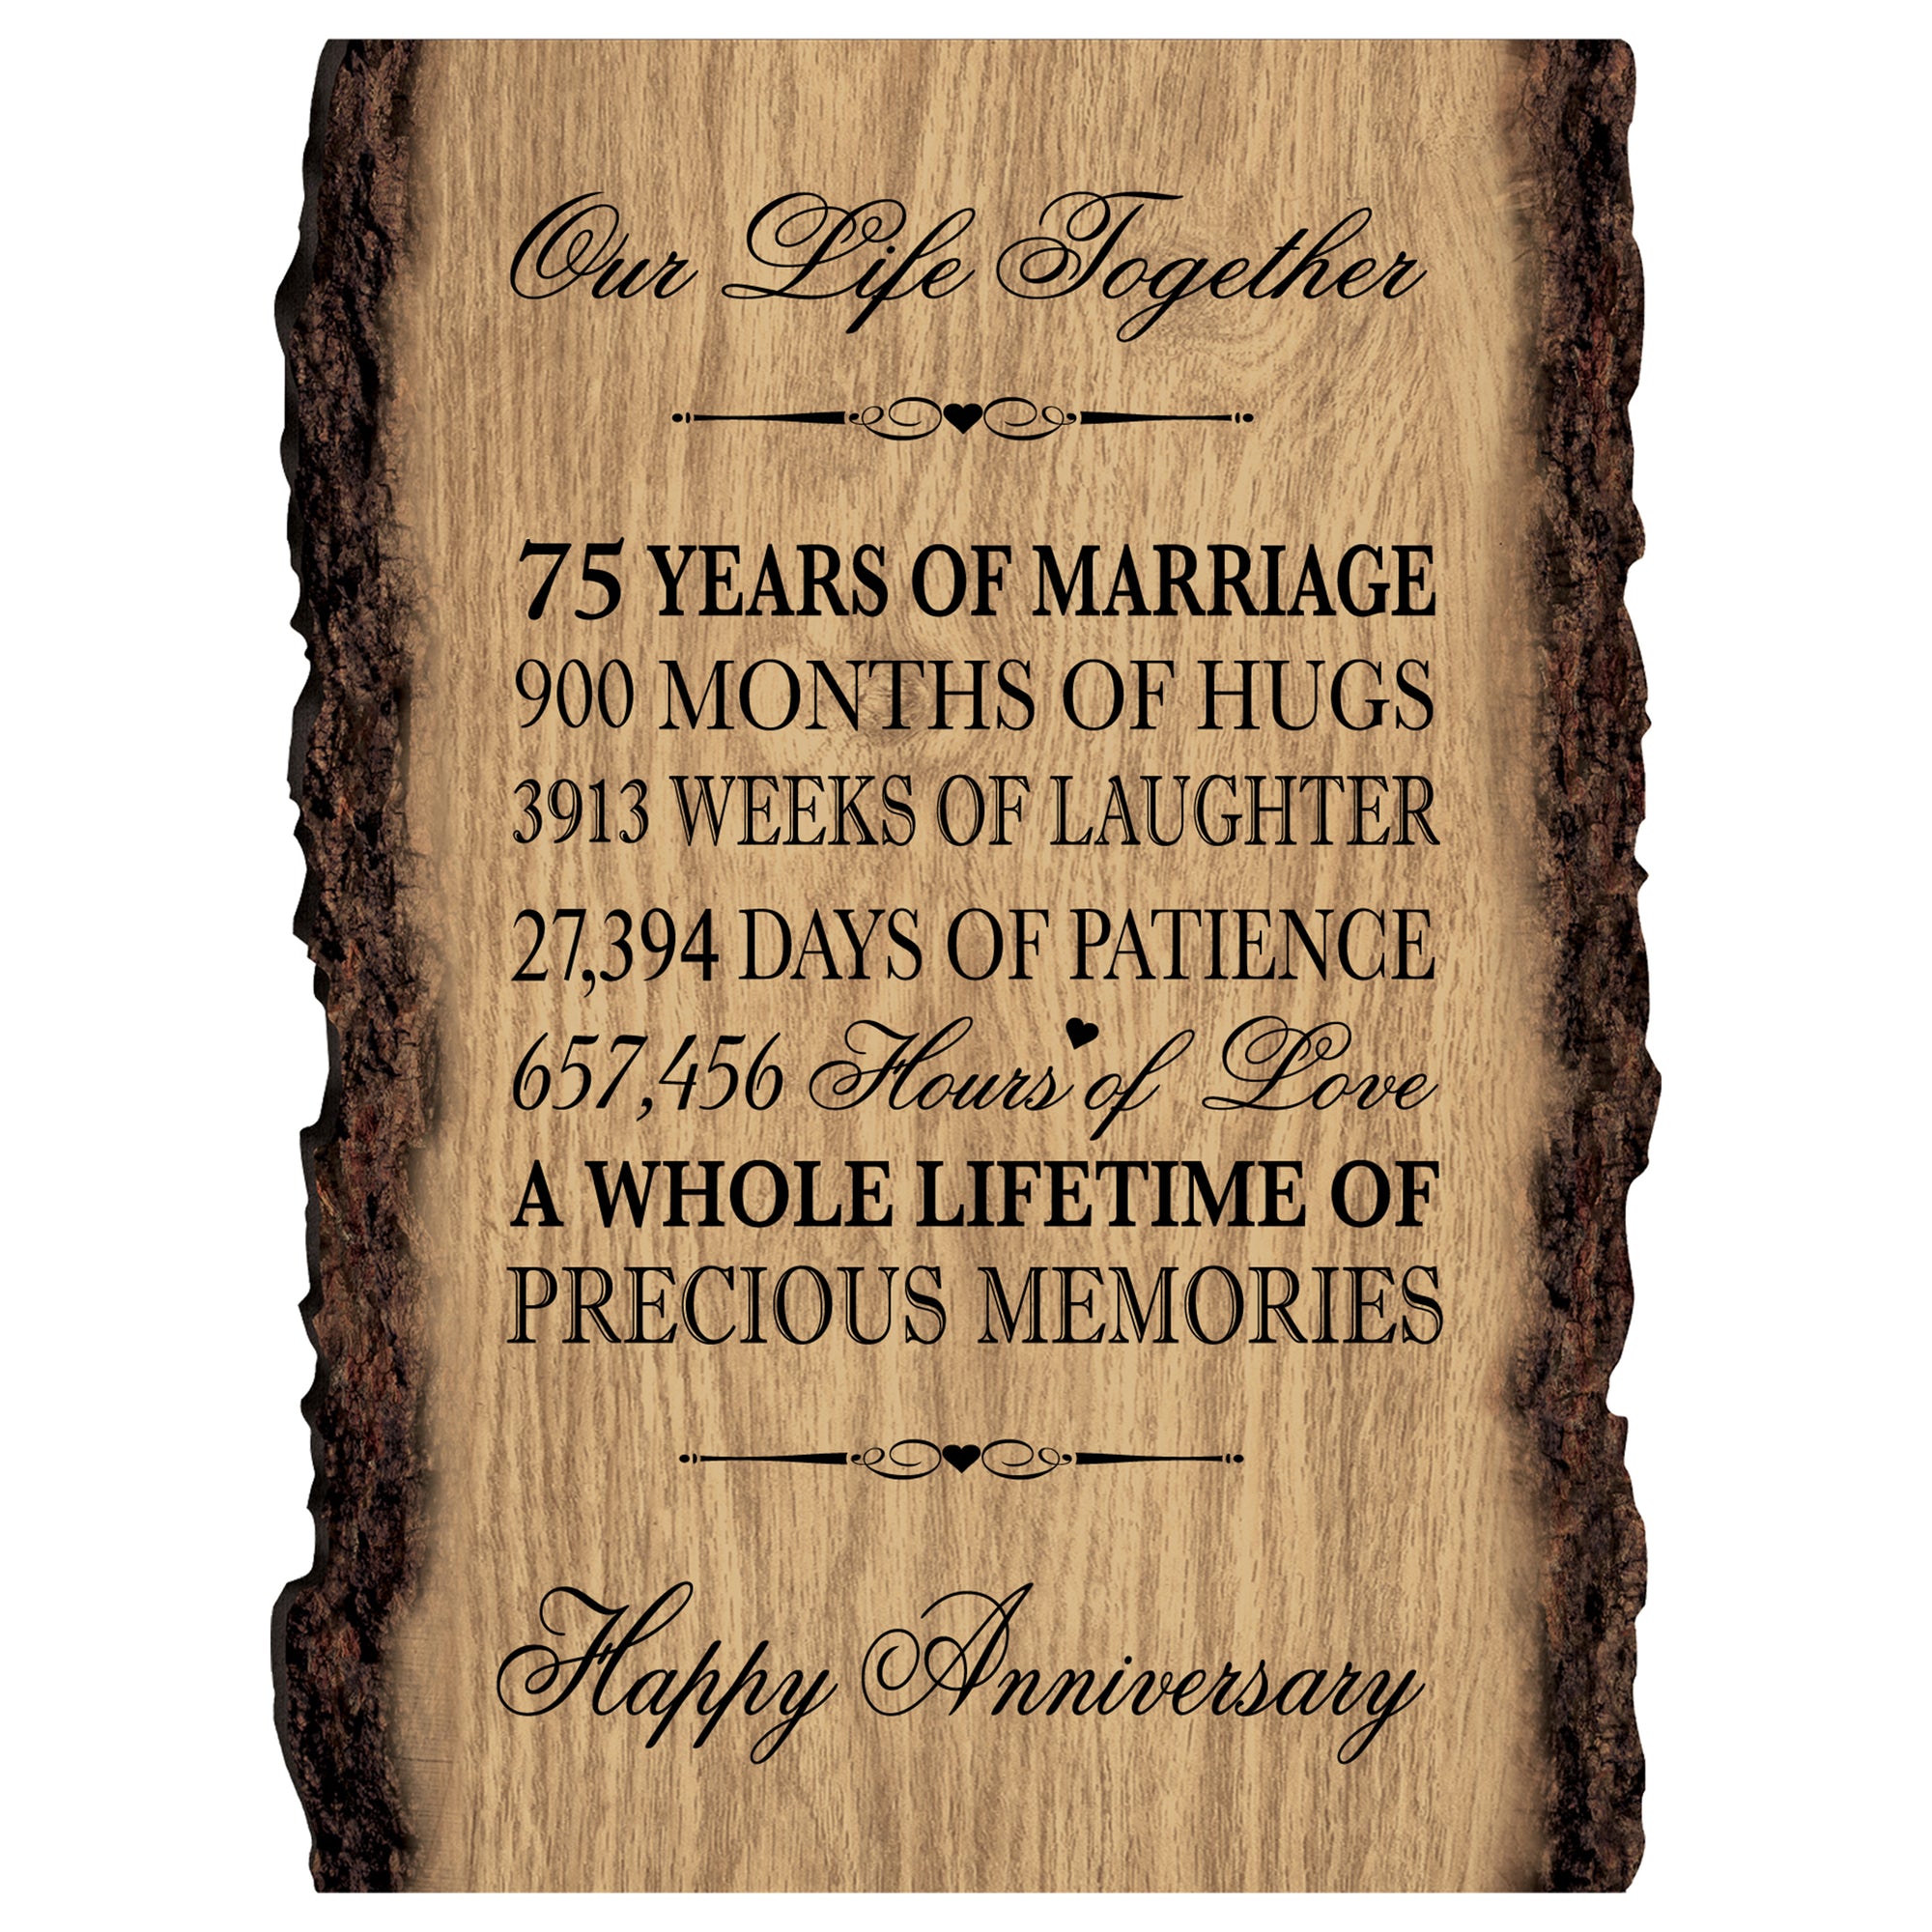 Rustic Wedding Anniversary 9x12 Barky Wall Plaque Gift For Parents, Grandparents New Couple - 75 Years Of Marriage